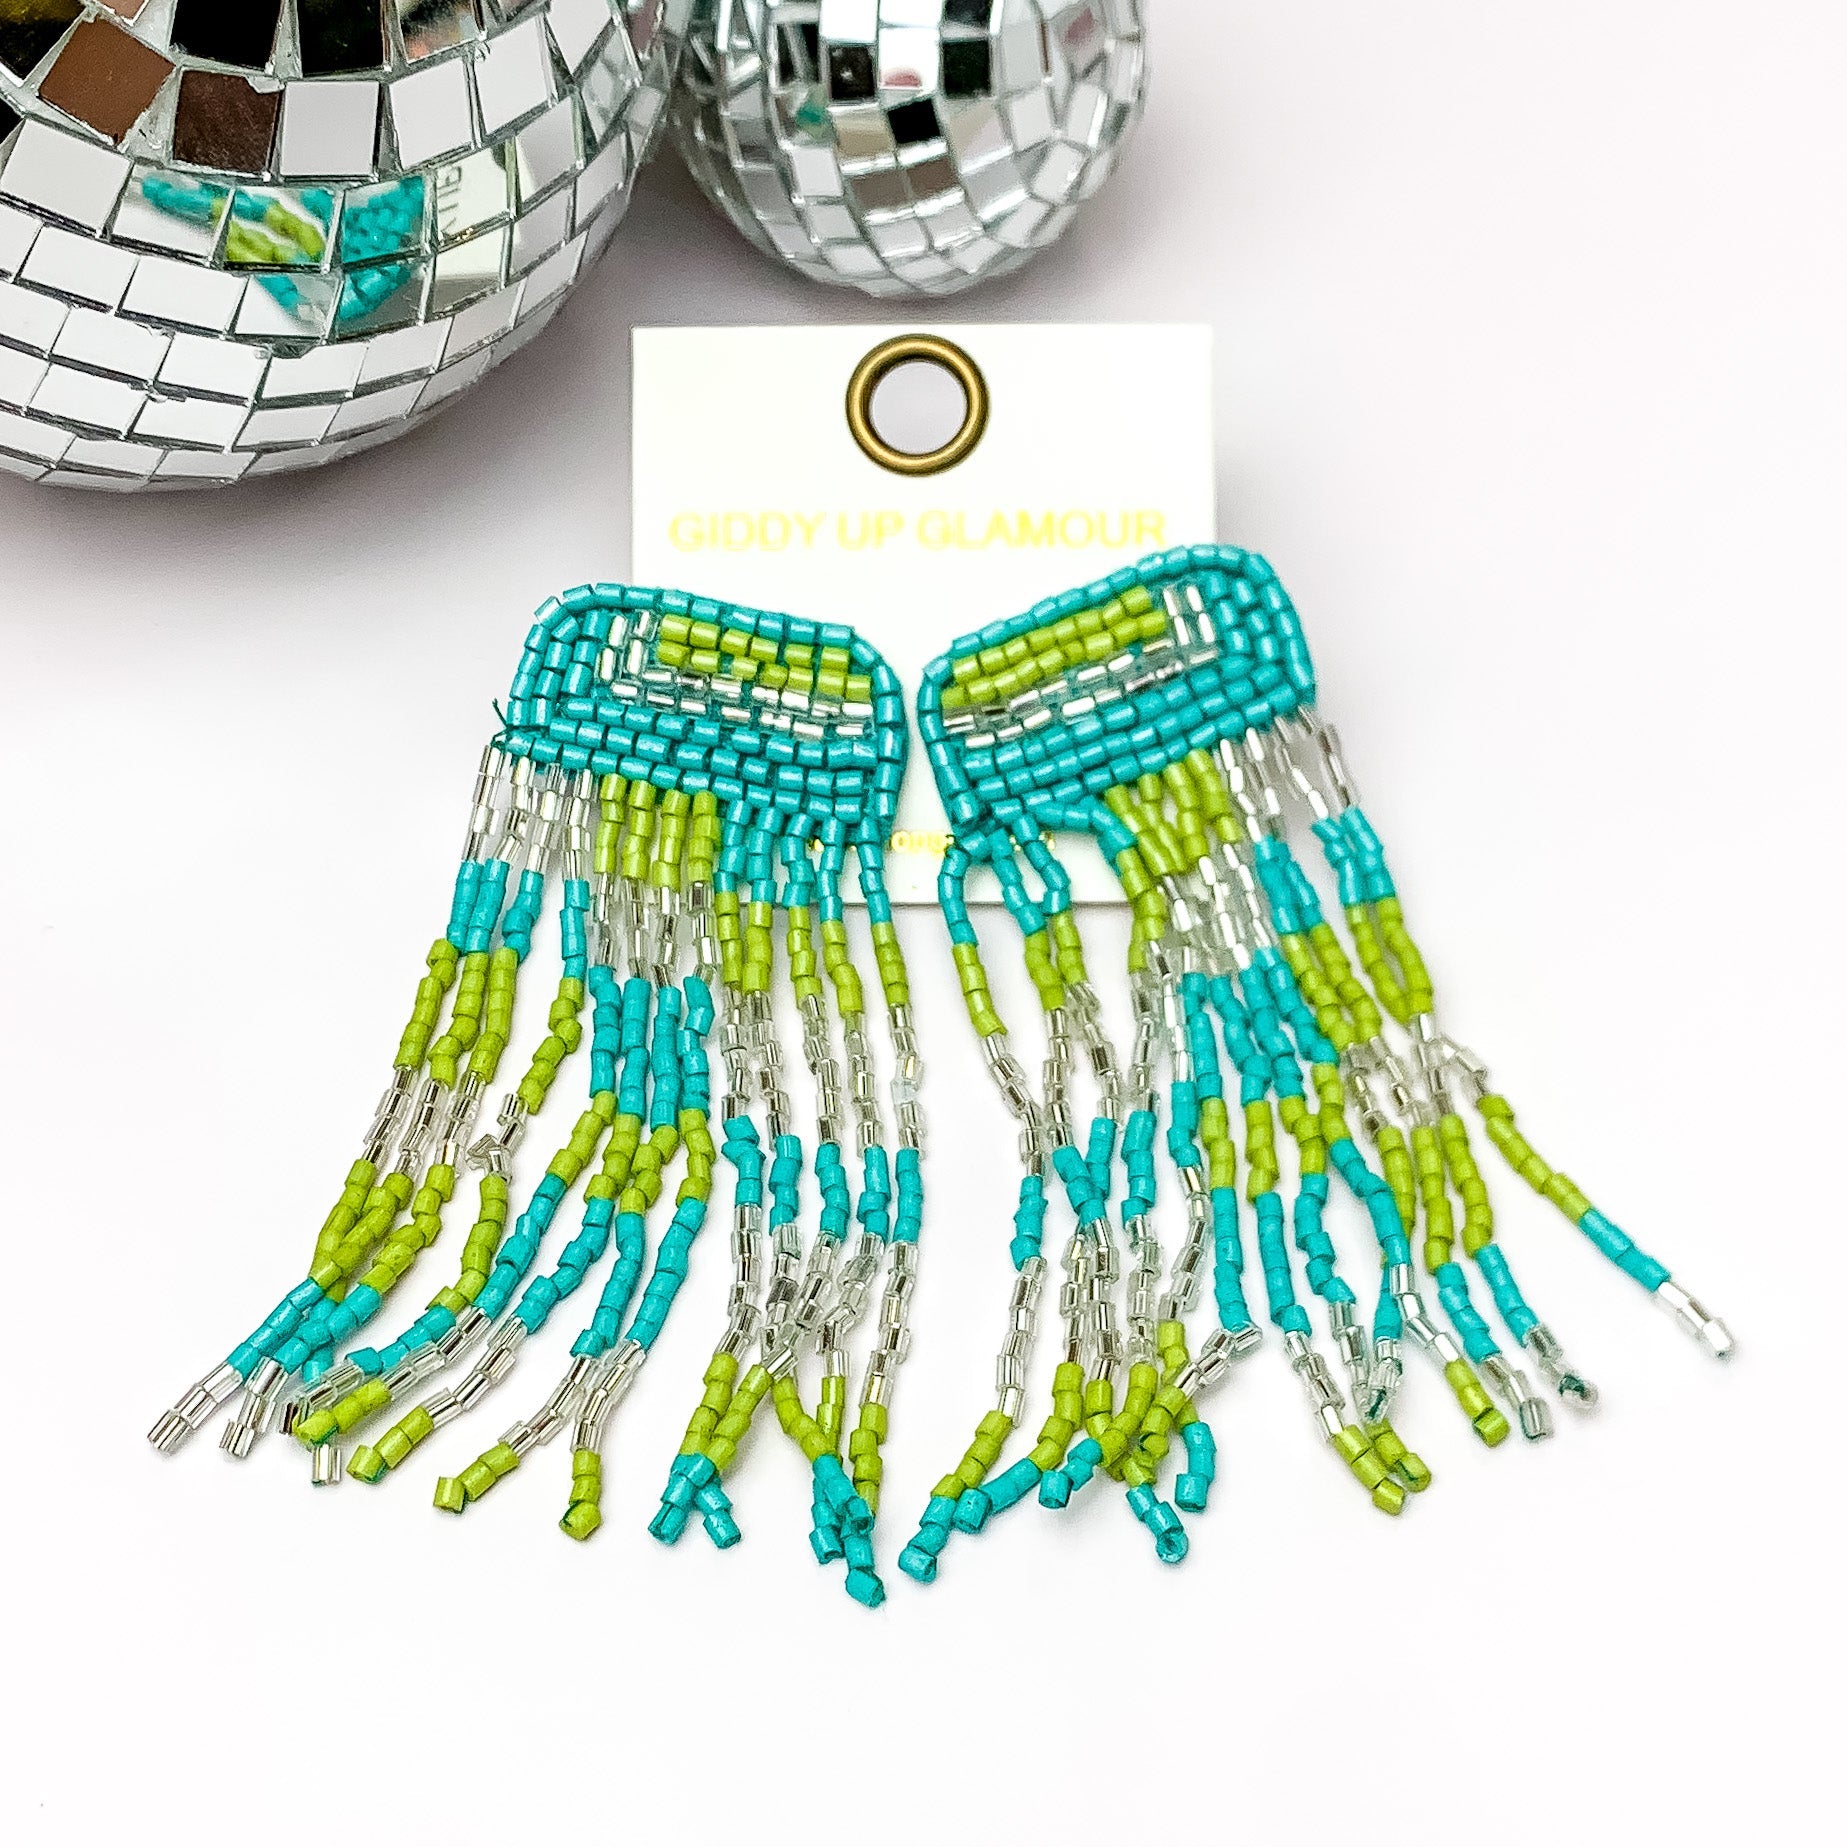 Beaded Tassel Earrings in Blue, and Green. Pictured on a white background with disco balls in the top left corner. 